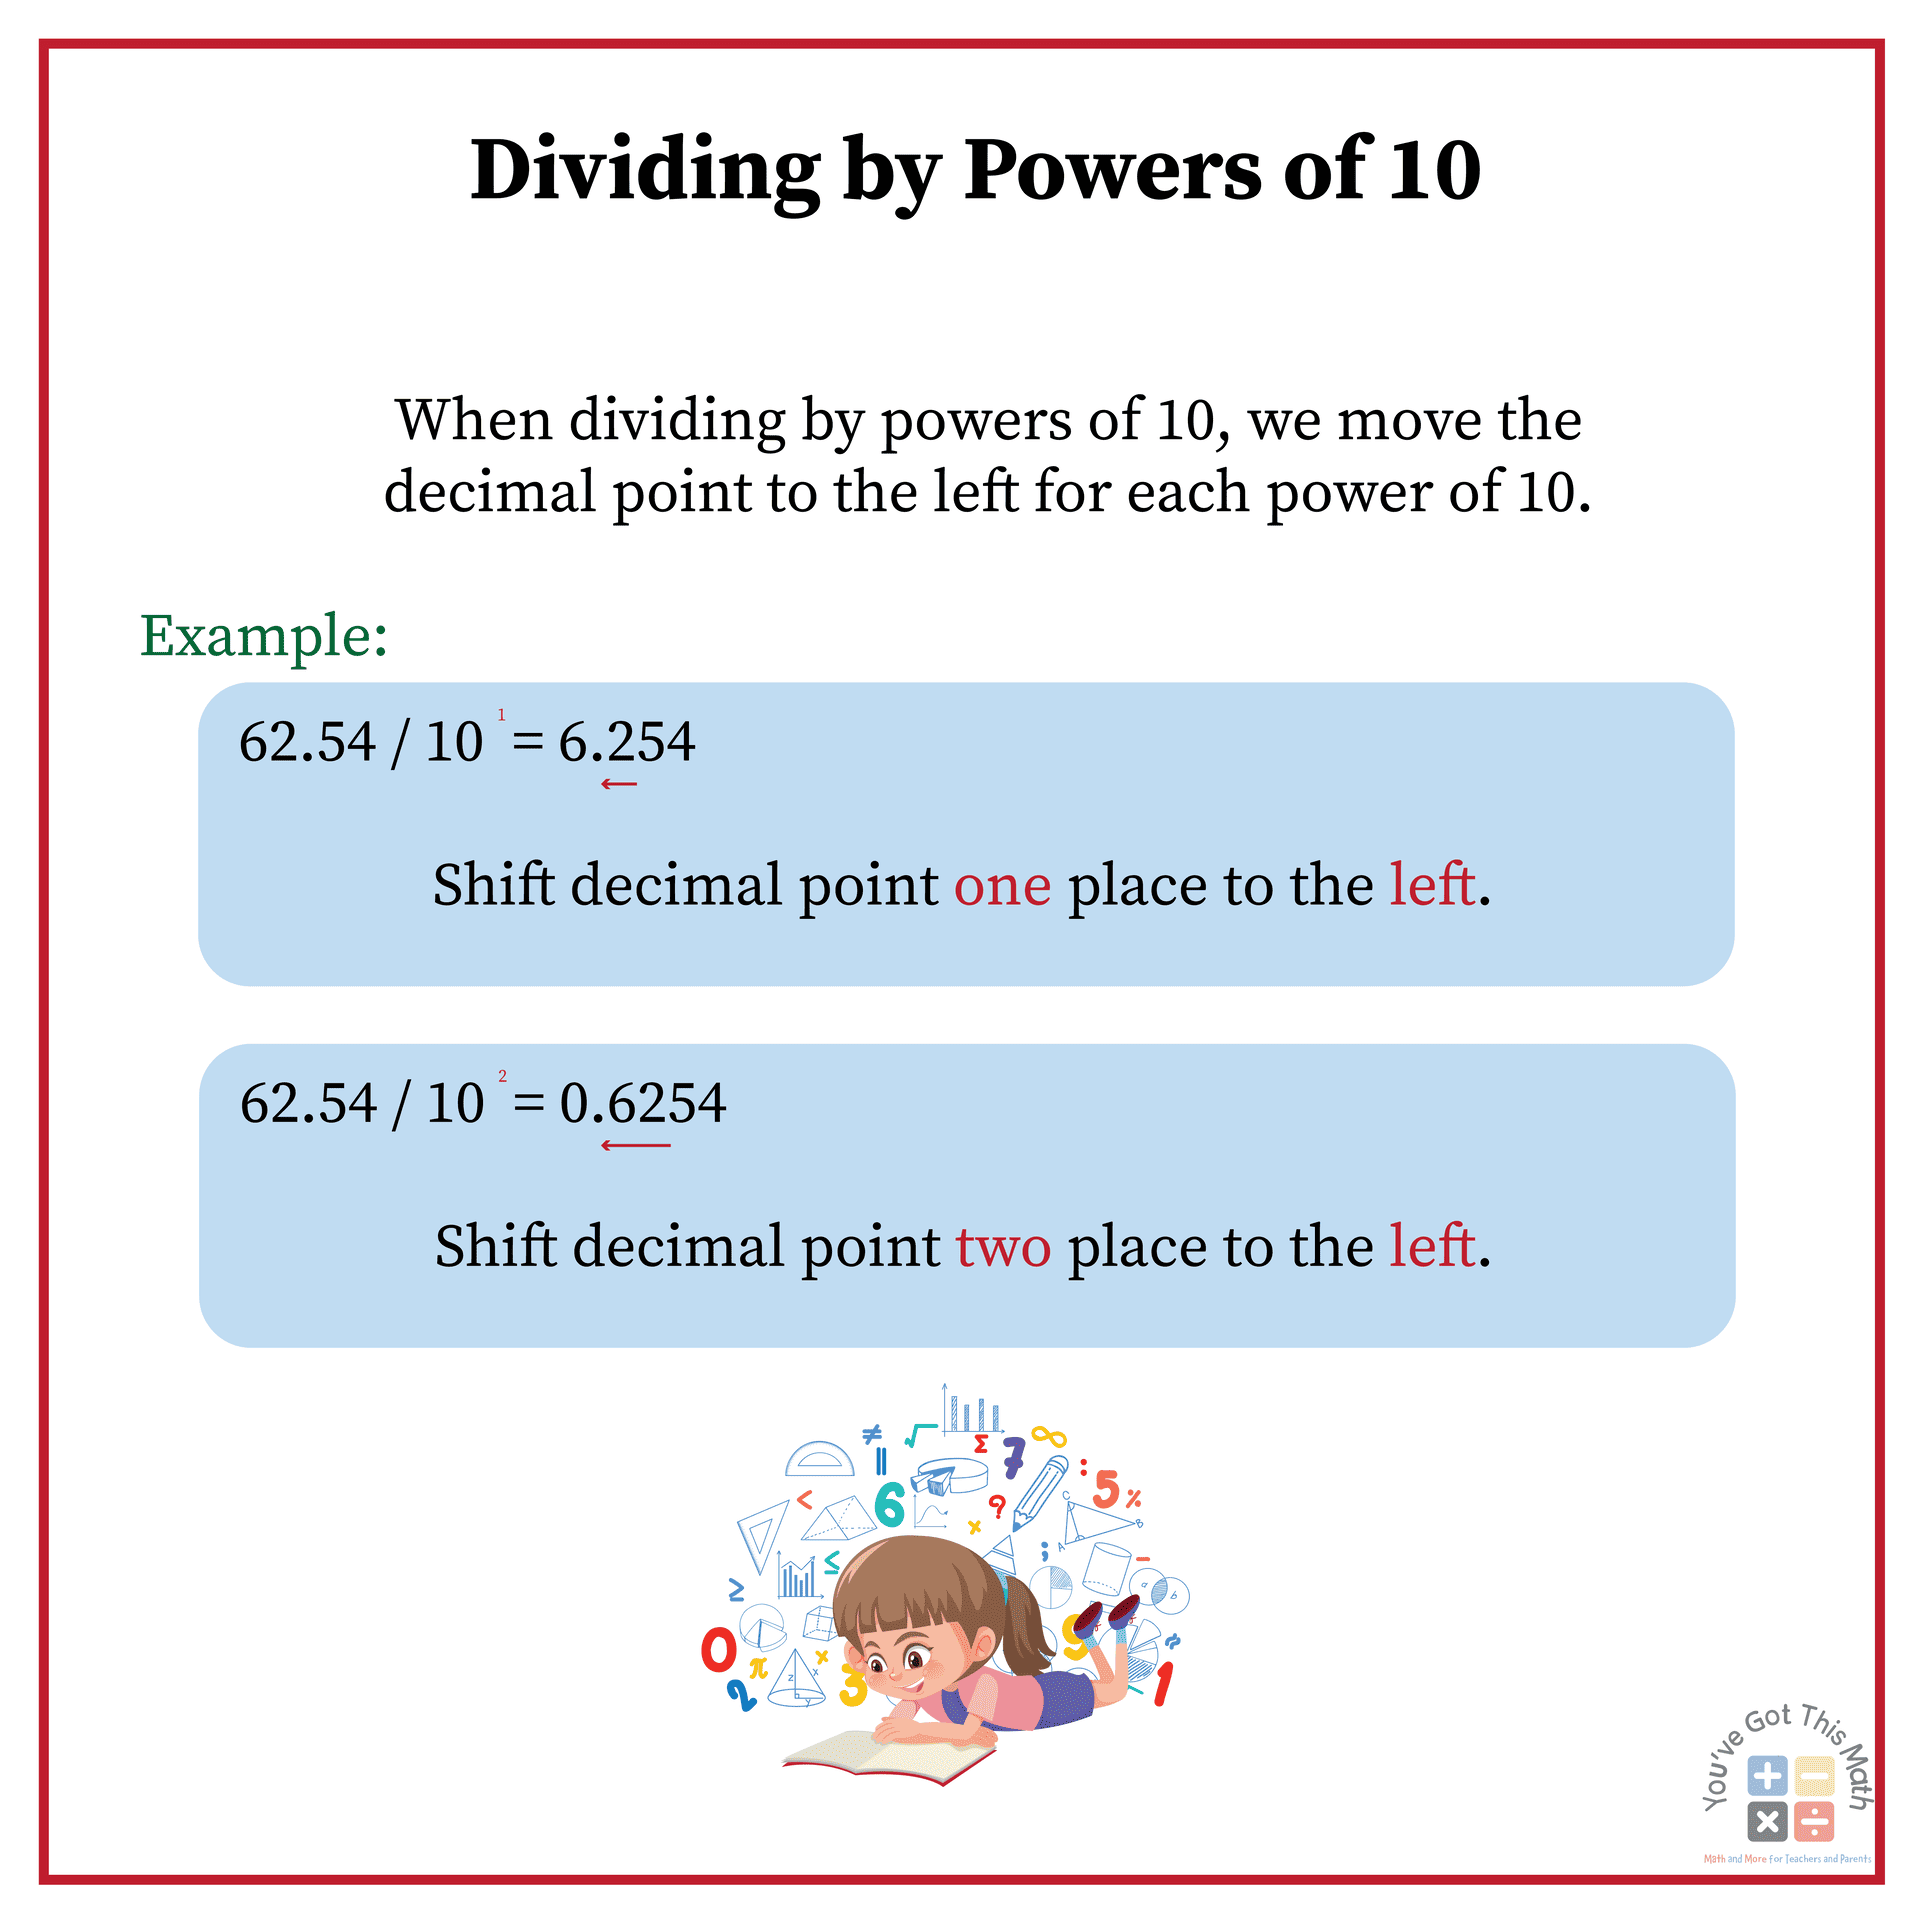 Dividing by powers of 10